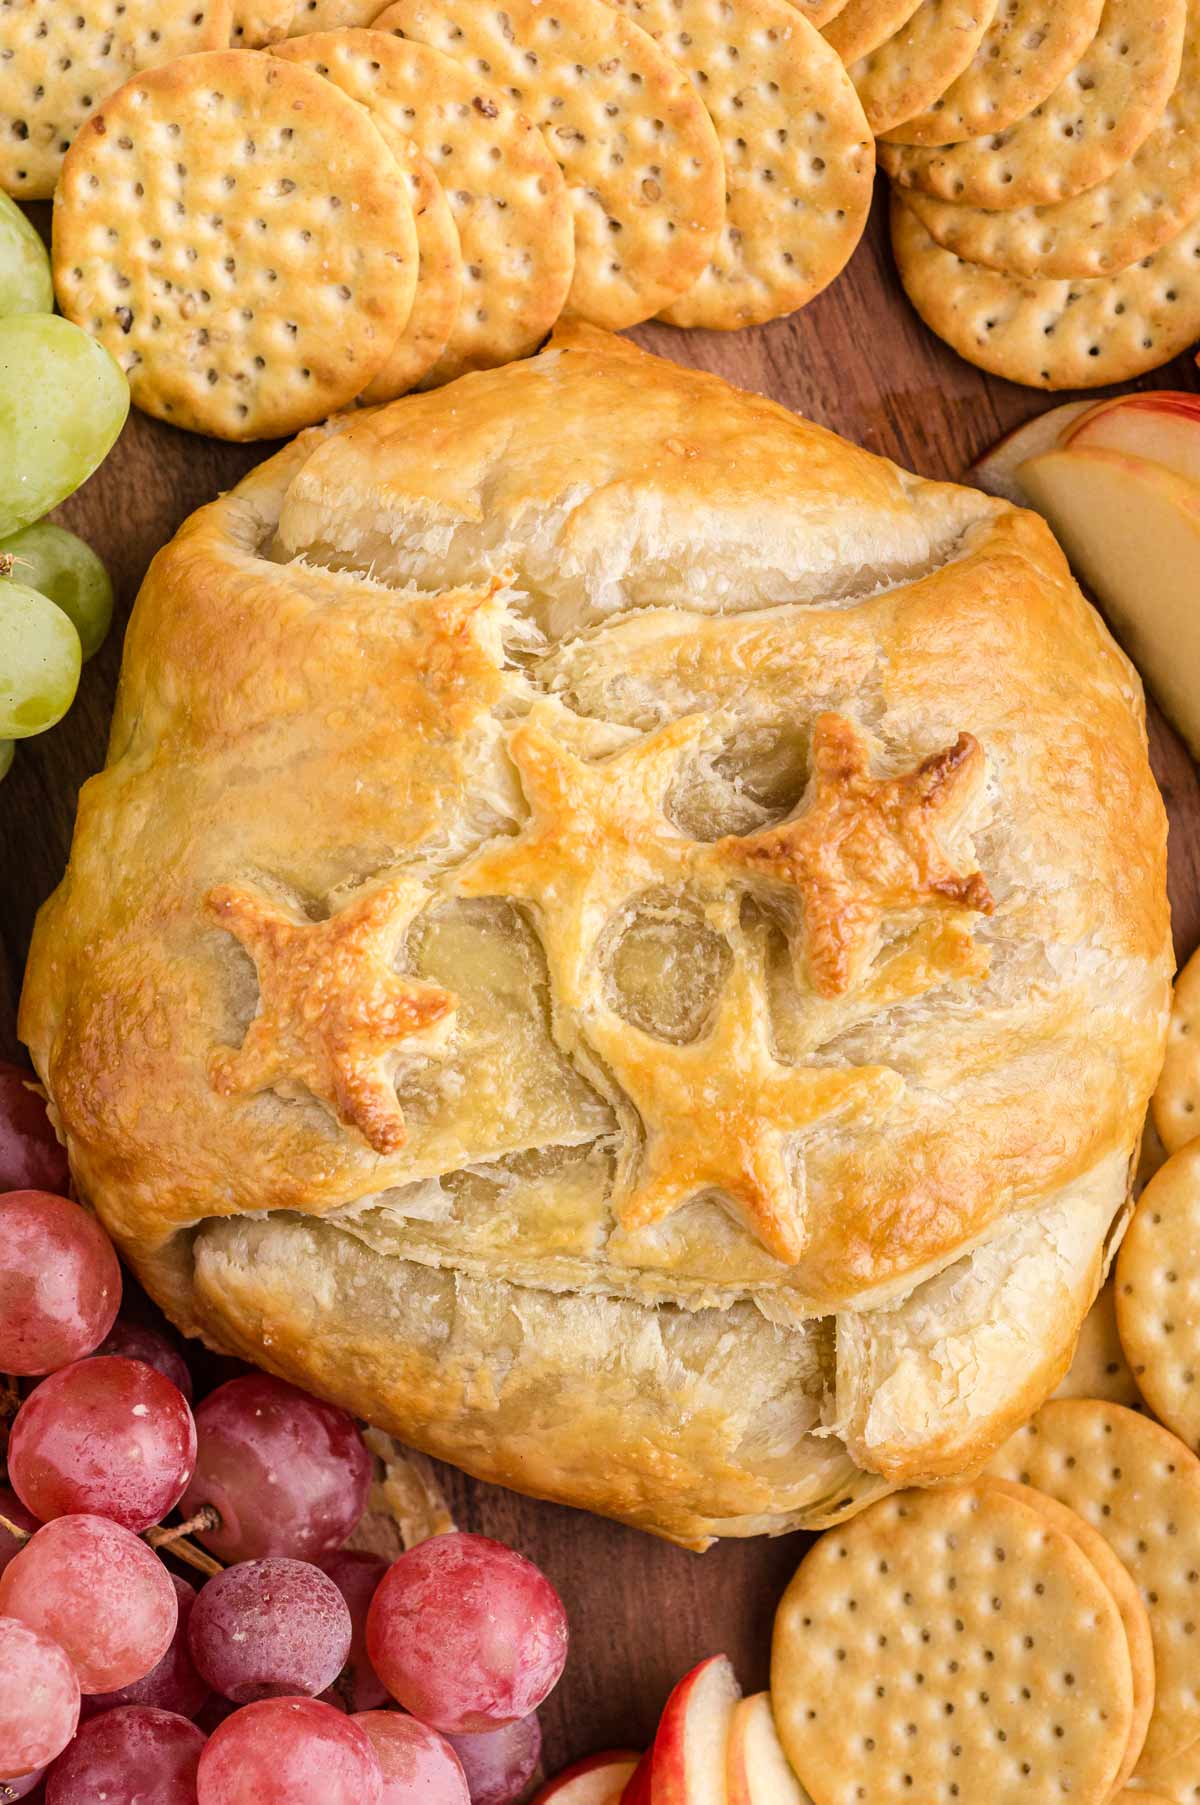 the baked brie.